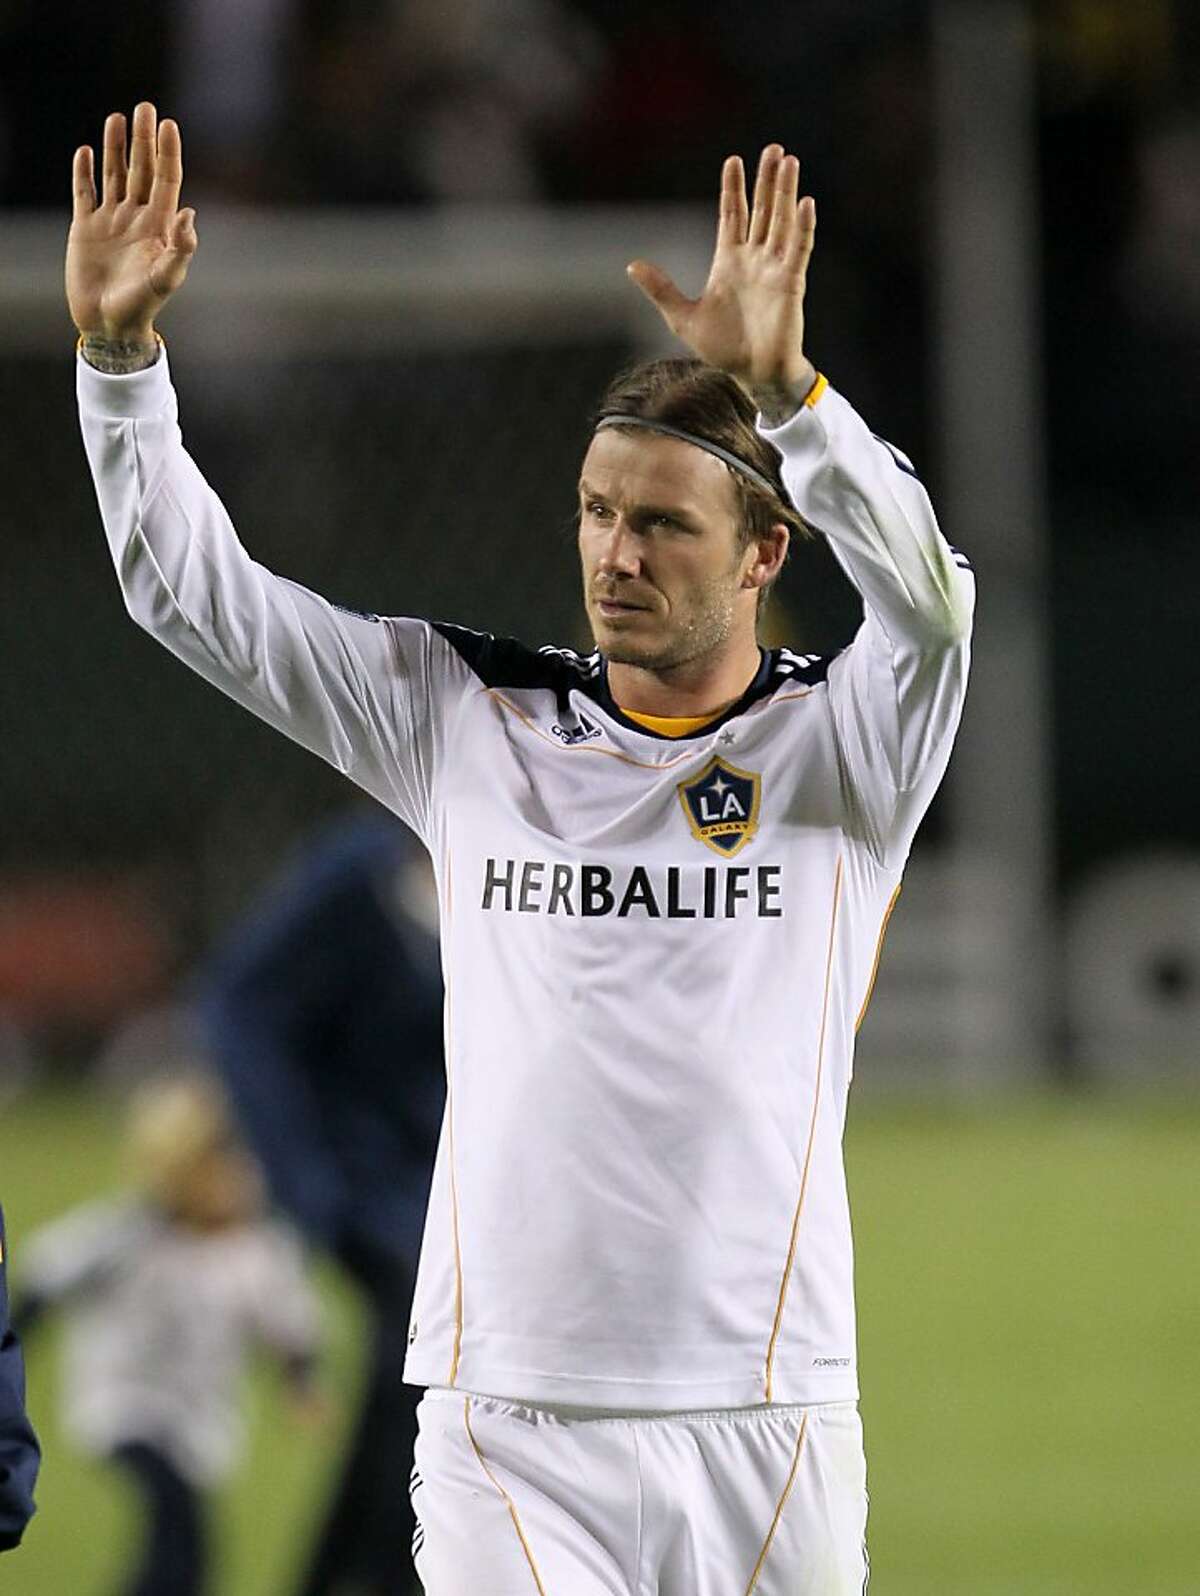 CARSON, CA - NOVEMBER 03: David Beckham #23 of the Los Angeles Galaxy waves to the crowd as he leaves the field after the game against the New York Red Bulls in their Western Conference Semifinal at The Home Depot Center on September 9, 2011 in Carson, California. The Galaxy won 2-1 to advance to the Conference Finals. (Photo by Stephen Dunn/Getty Images)